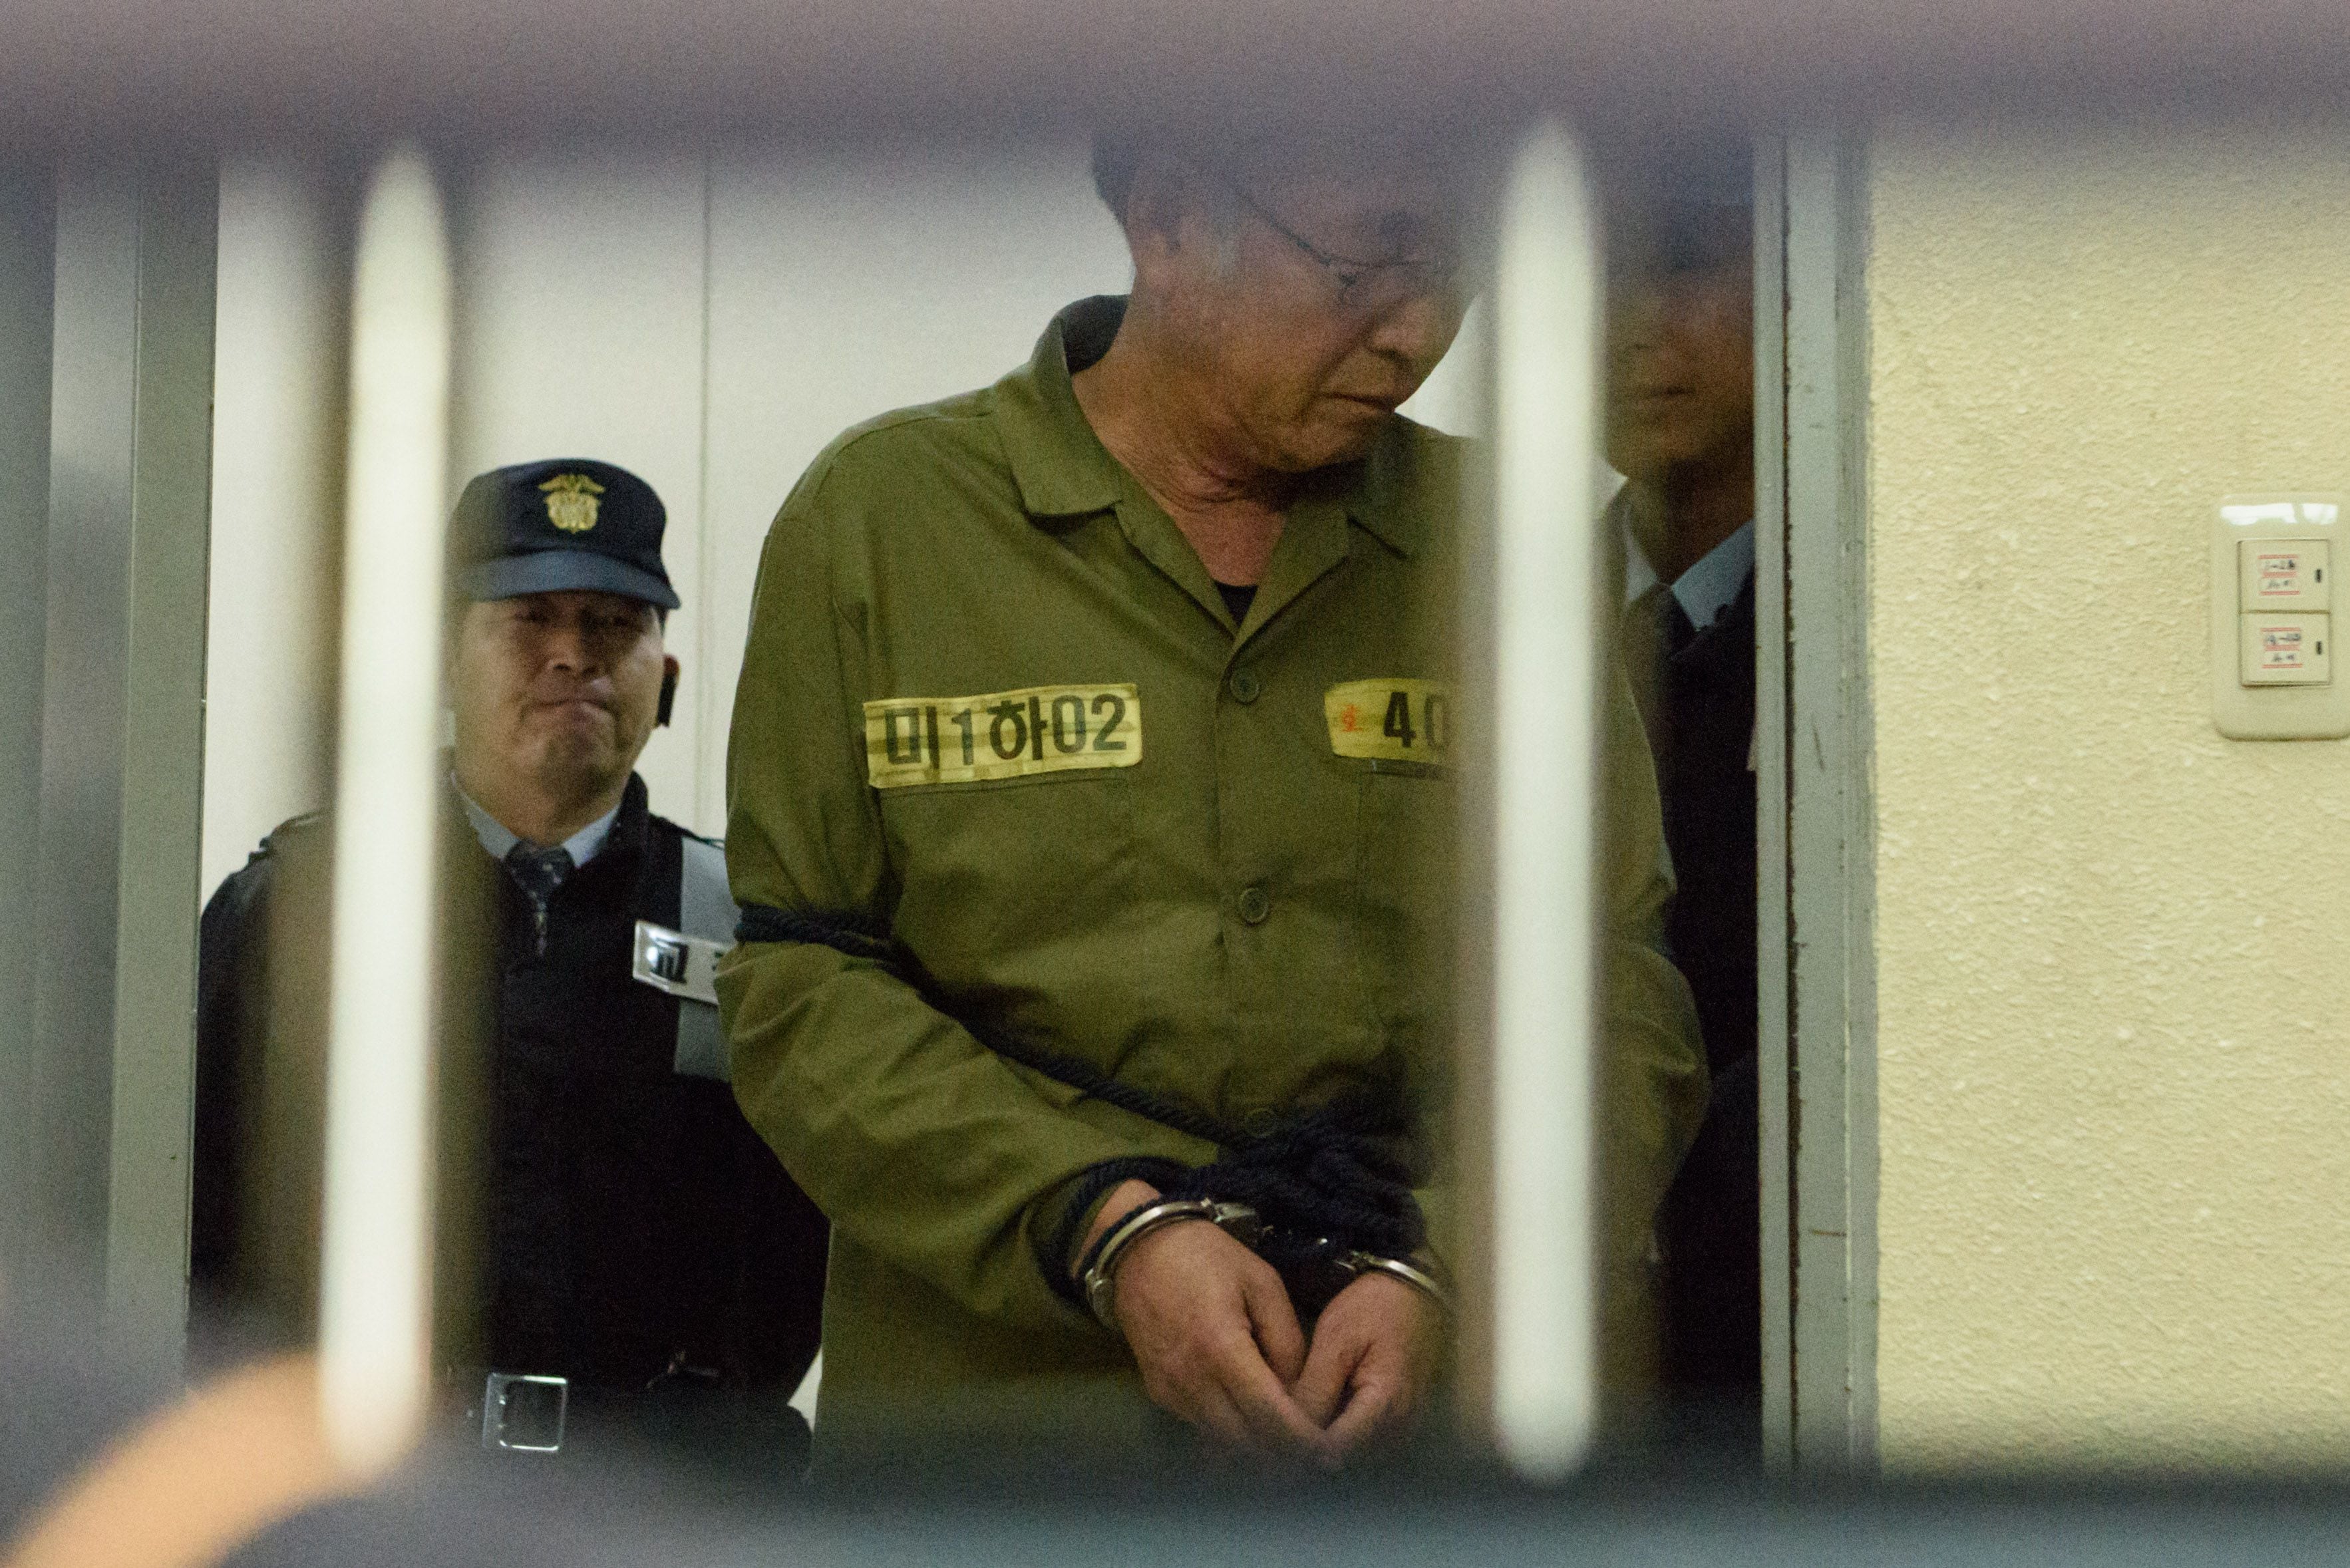 Sewol ferry captain Lee Jun-Seok is escorted after arriving at a court in Gwangju on November 11, 2014. (Photo by ED JONES/AFP).